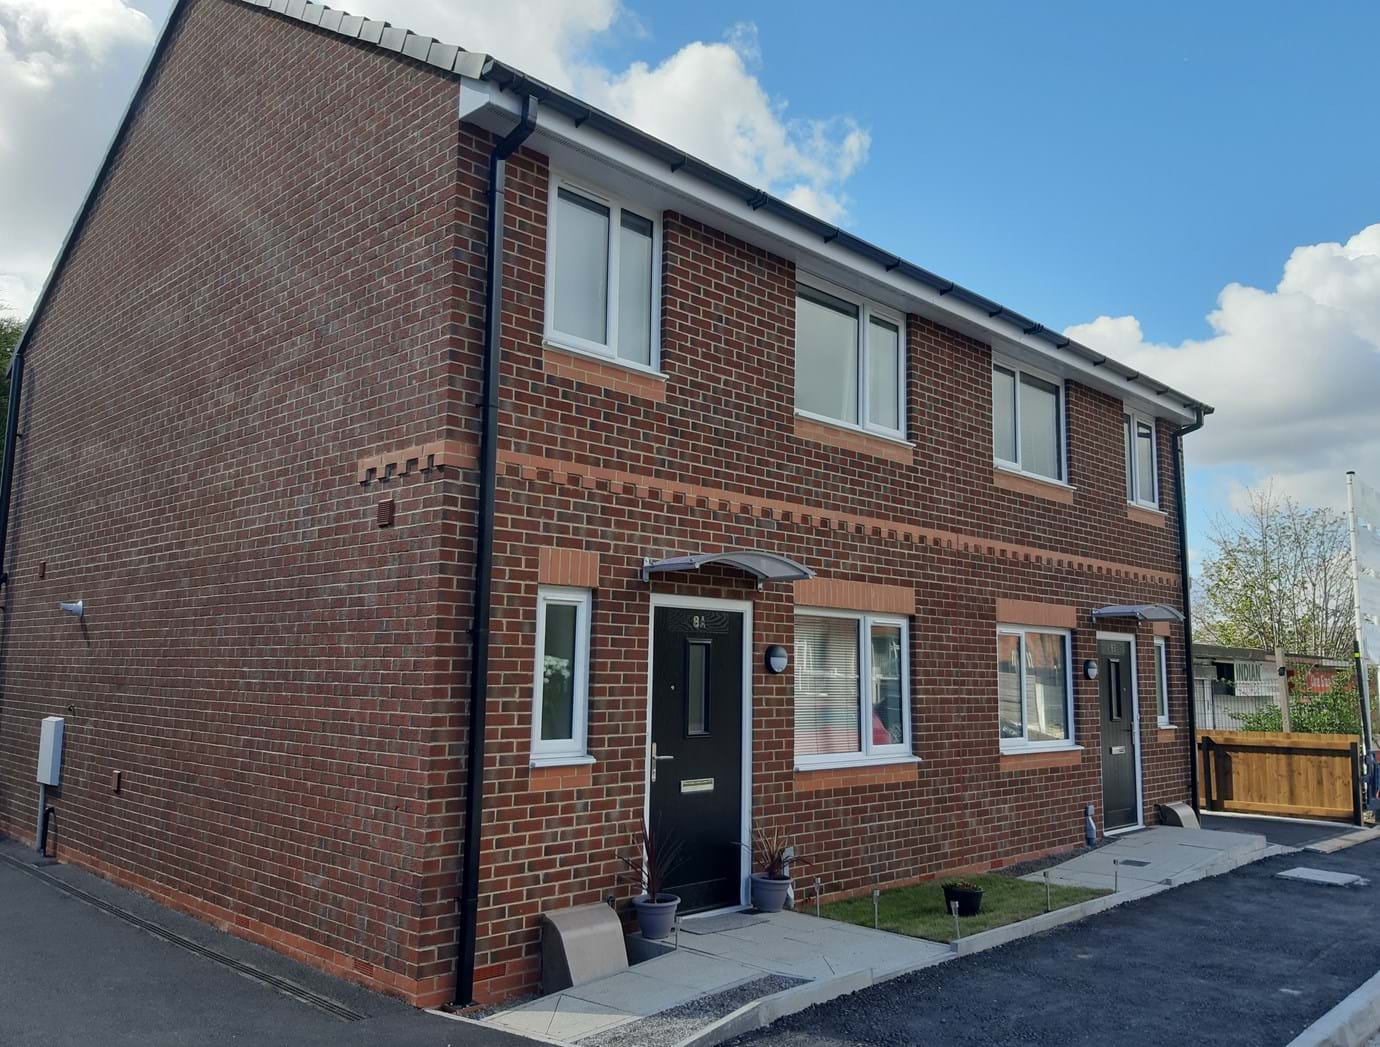 Our Royley development comprises 11 three-bedroom and 4 four-bedroom houses, all for affordable rent.